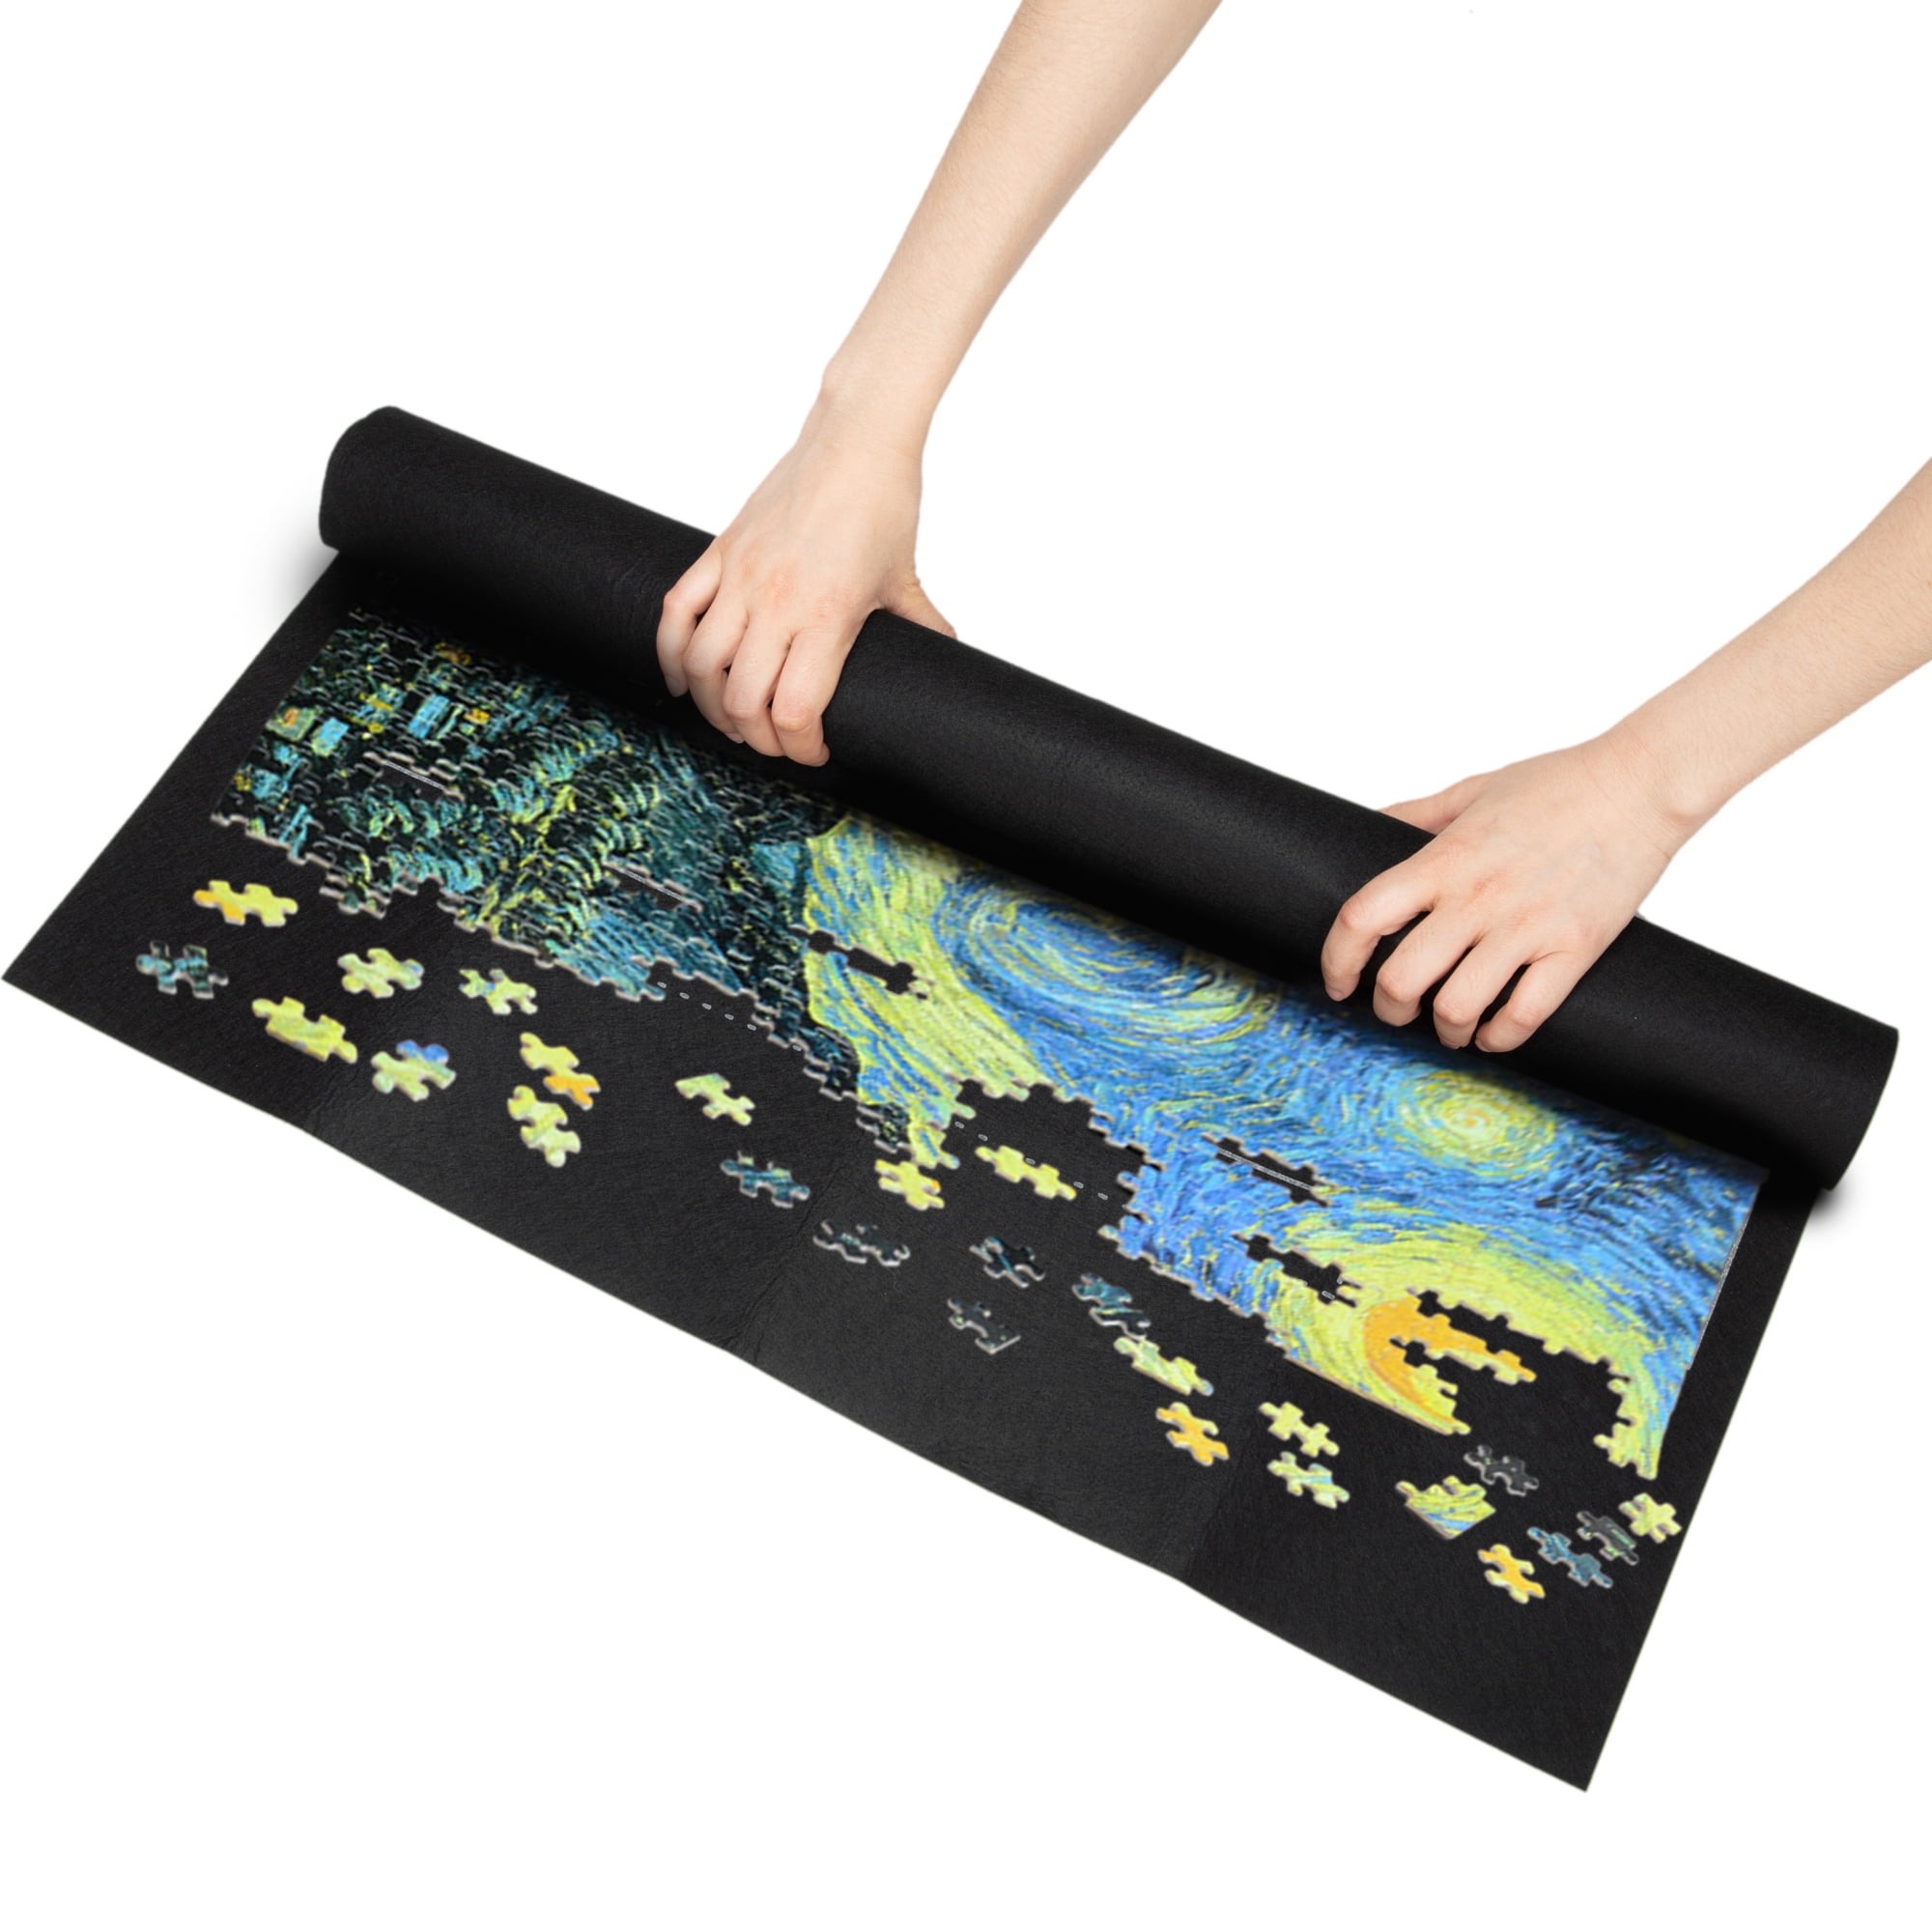 Puzzle Saver for & LAVIEVERT Jigsaw Puzzle Storage Mat Roll Up to 1,500 Pieces 